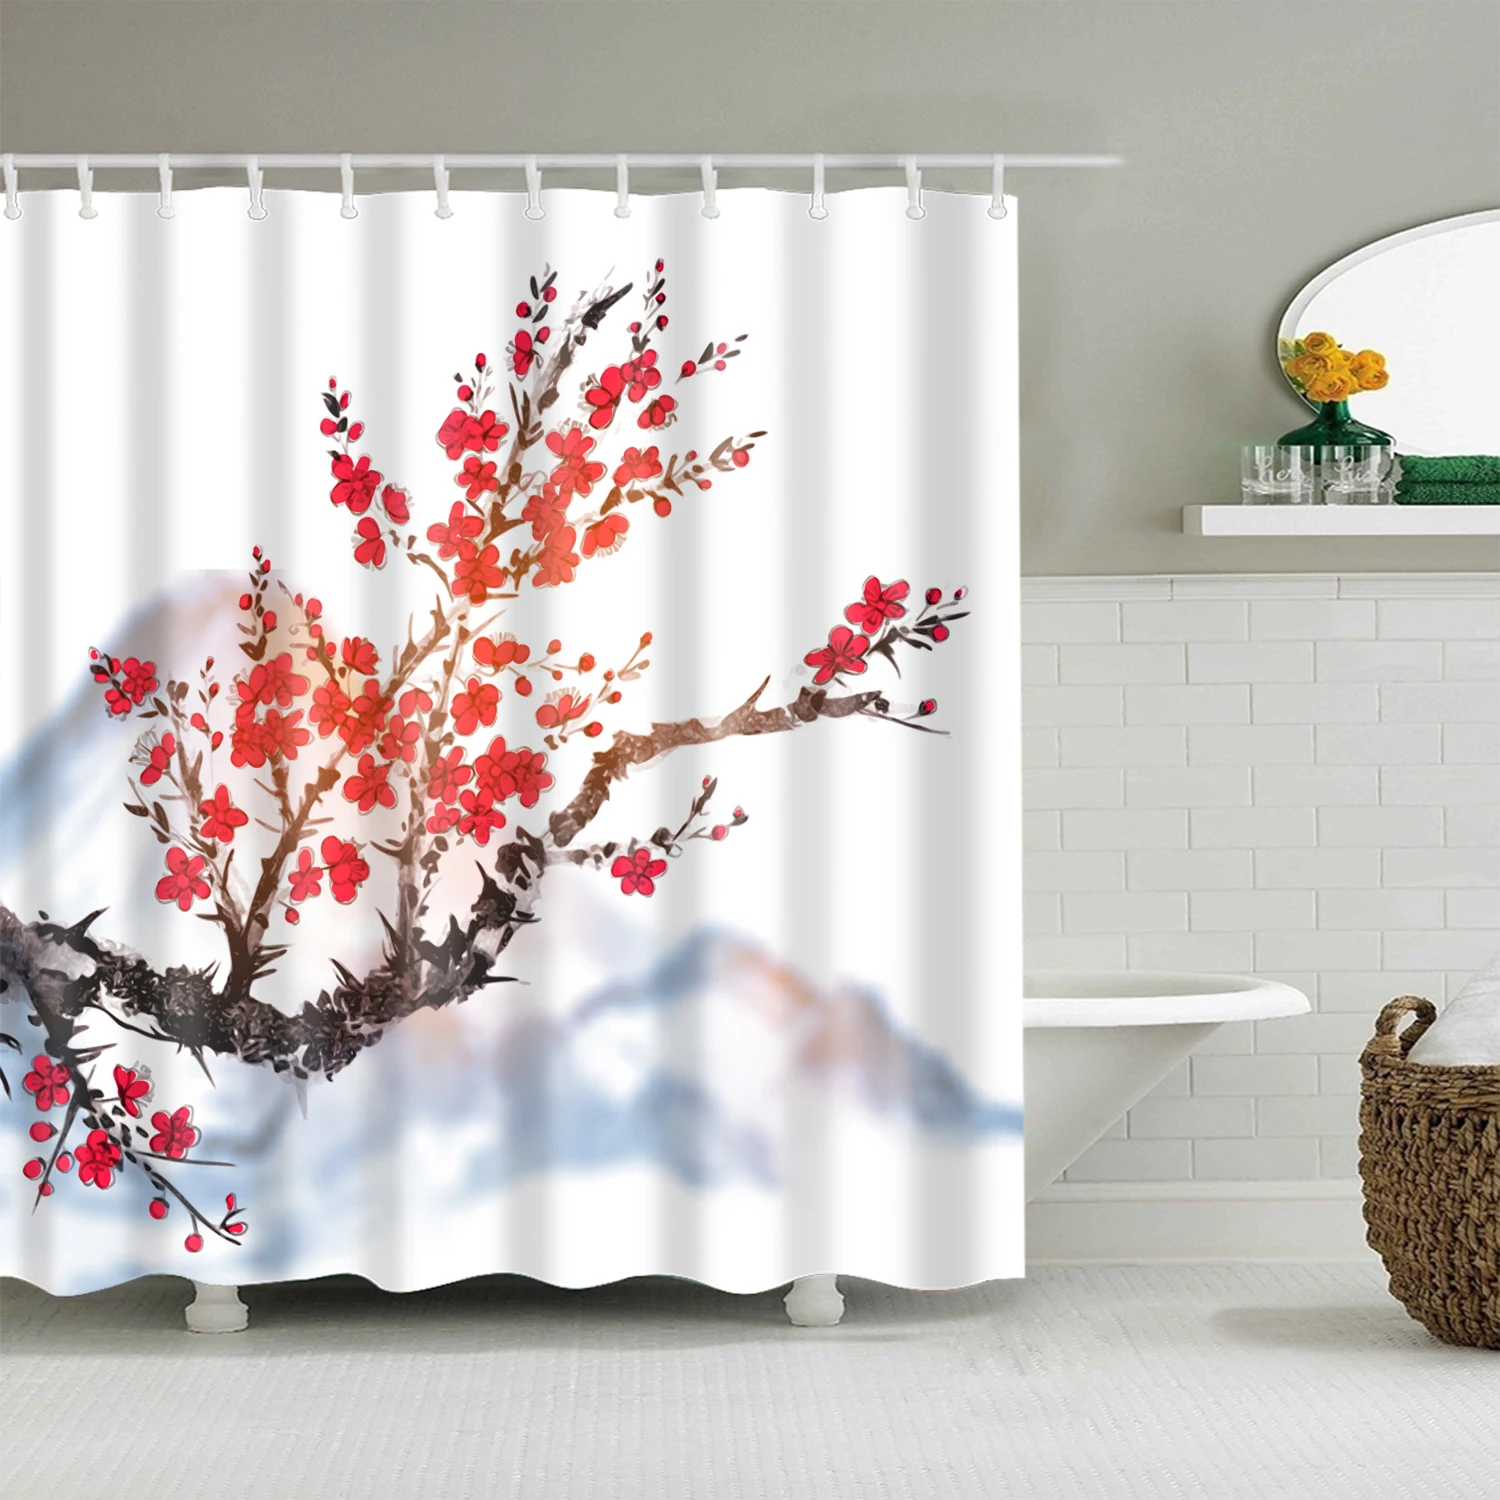 

Japanese Style Cherry Blossoms Red Rose Shower Curtains Bathroom Curtain Frabic with Hooks Waterproof Polyester Bathroom Curtain